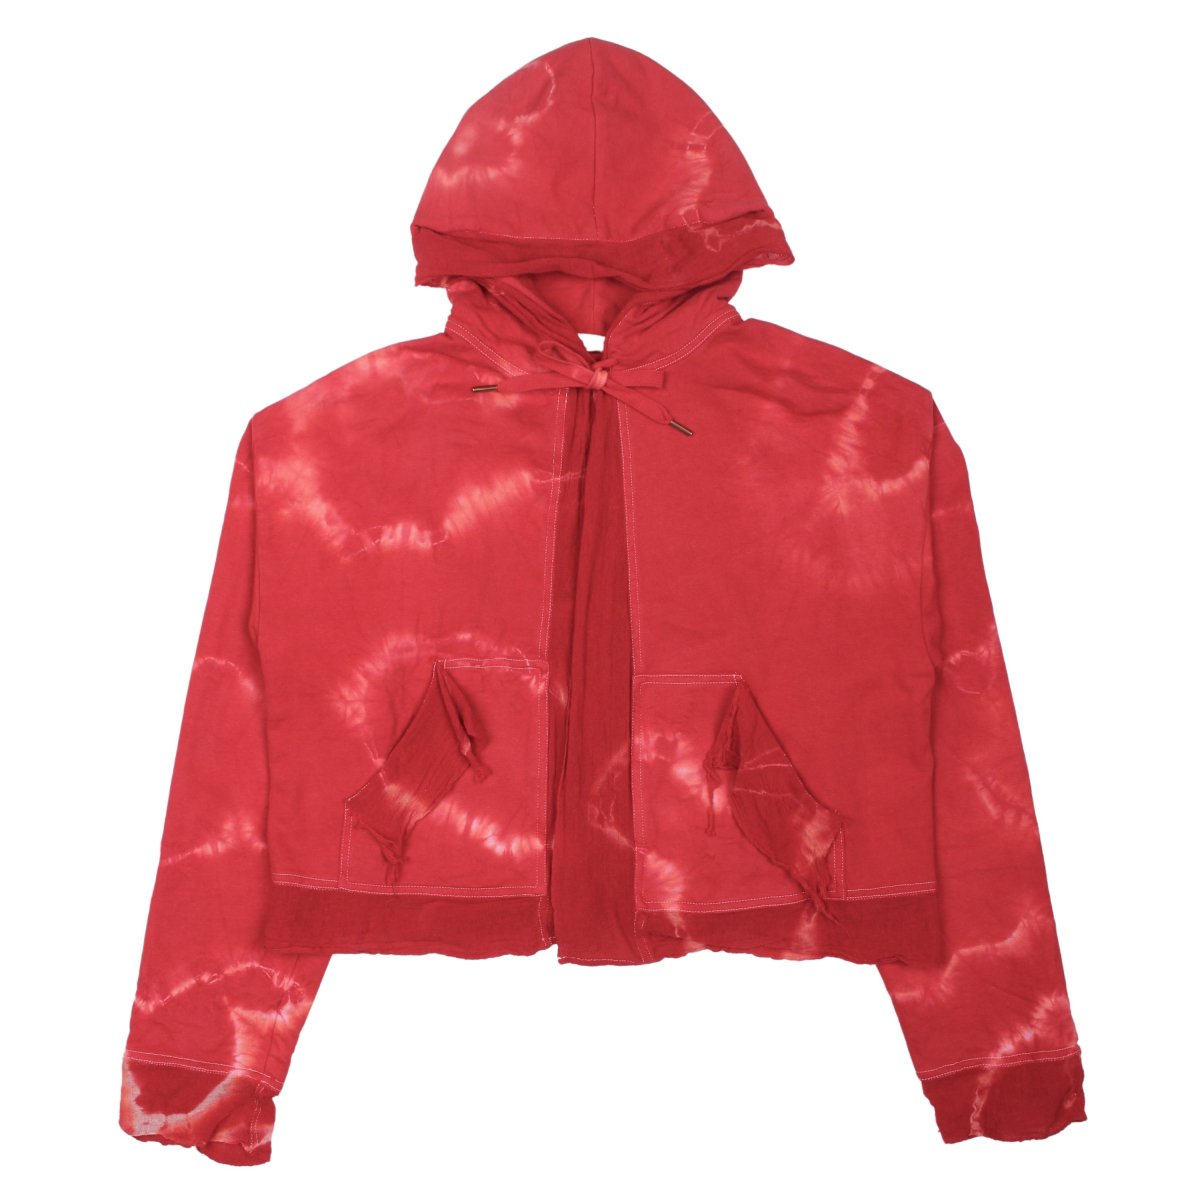 Ethereal Hoodie ChartreuseRed